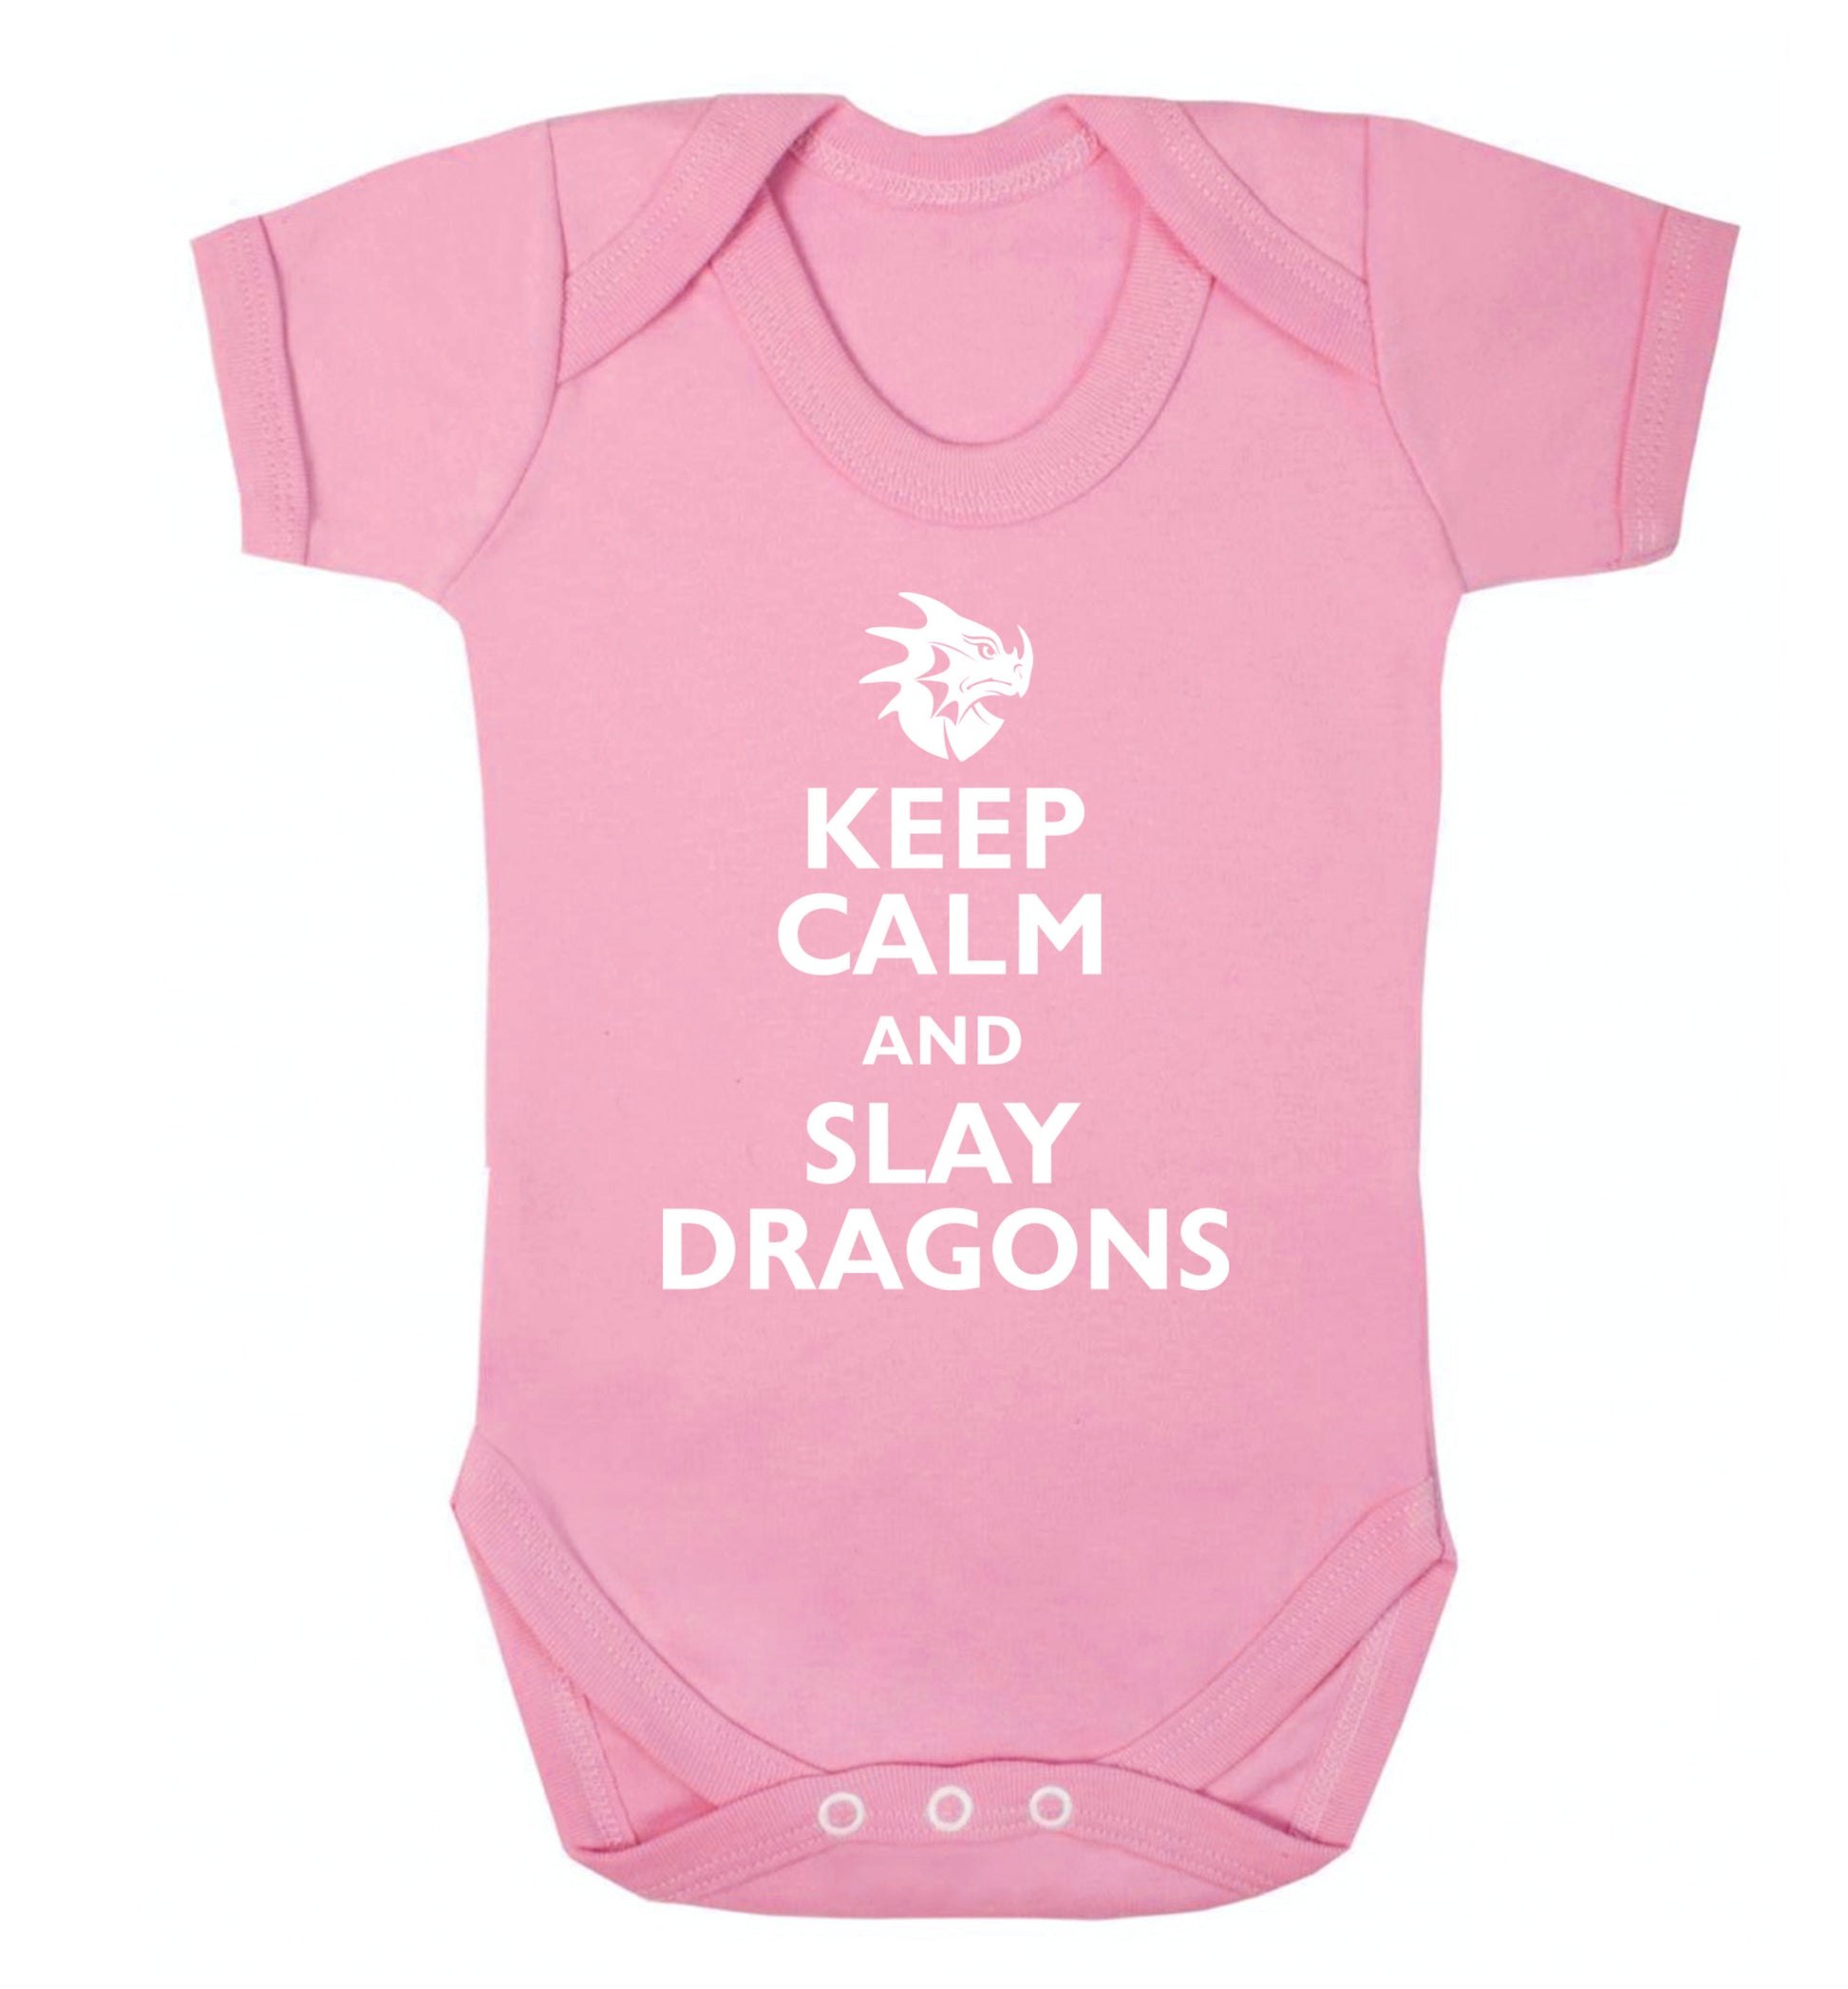 Keep calm and slay dragons Baby Vest pale pink 18-24 months